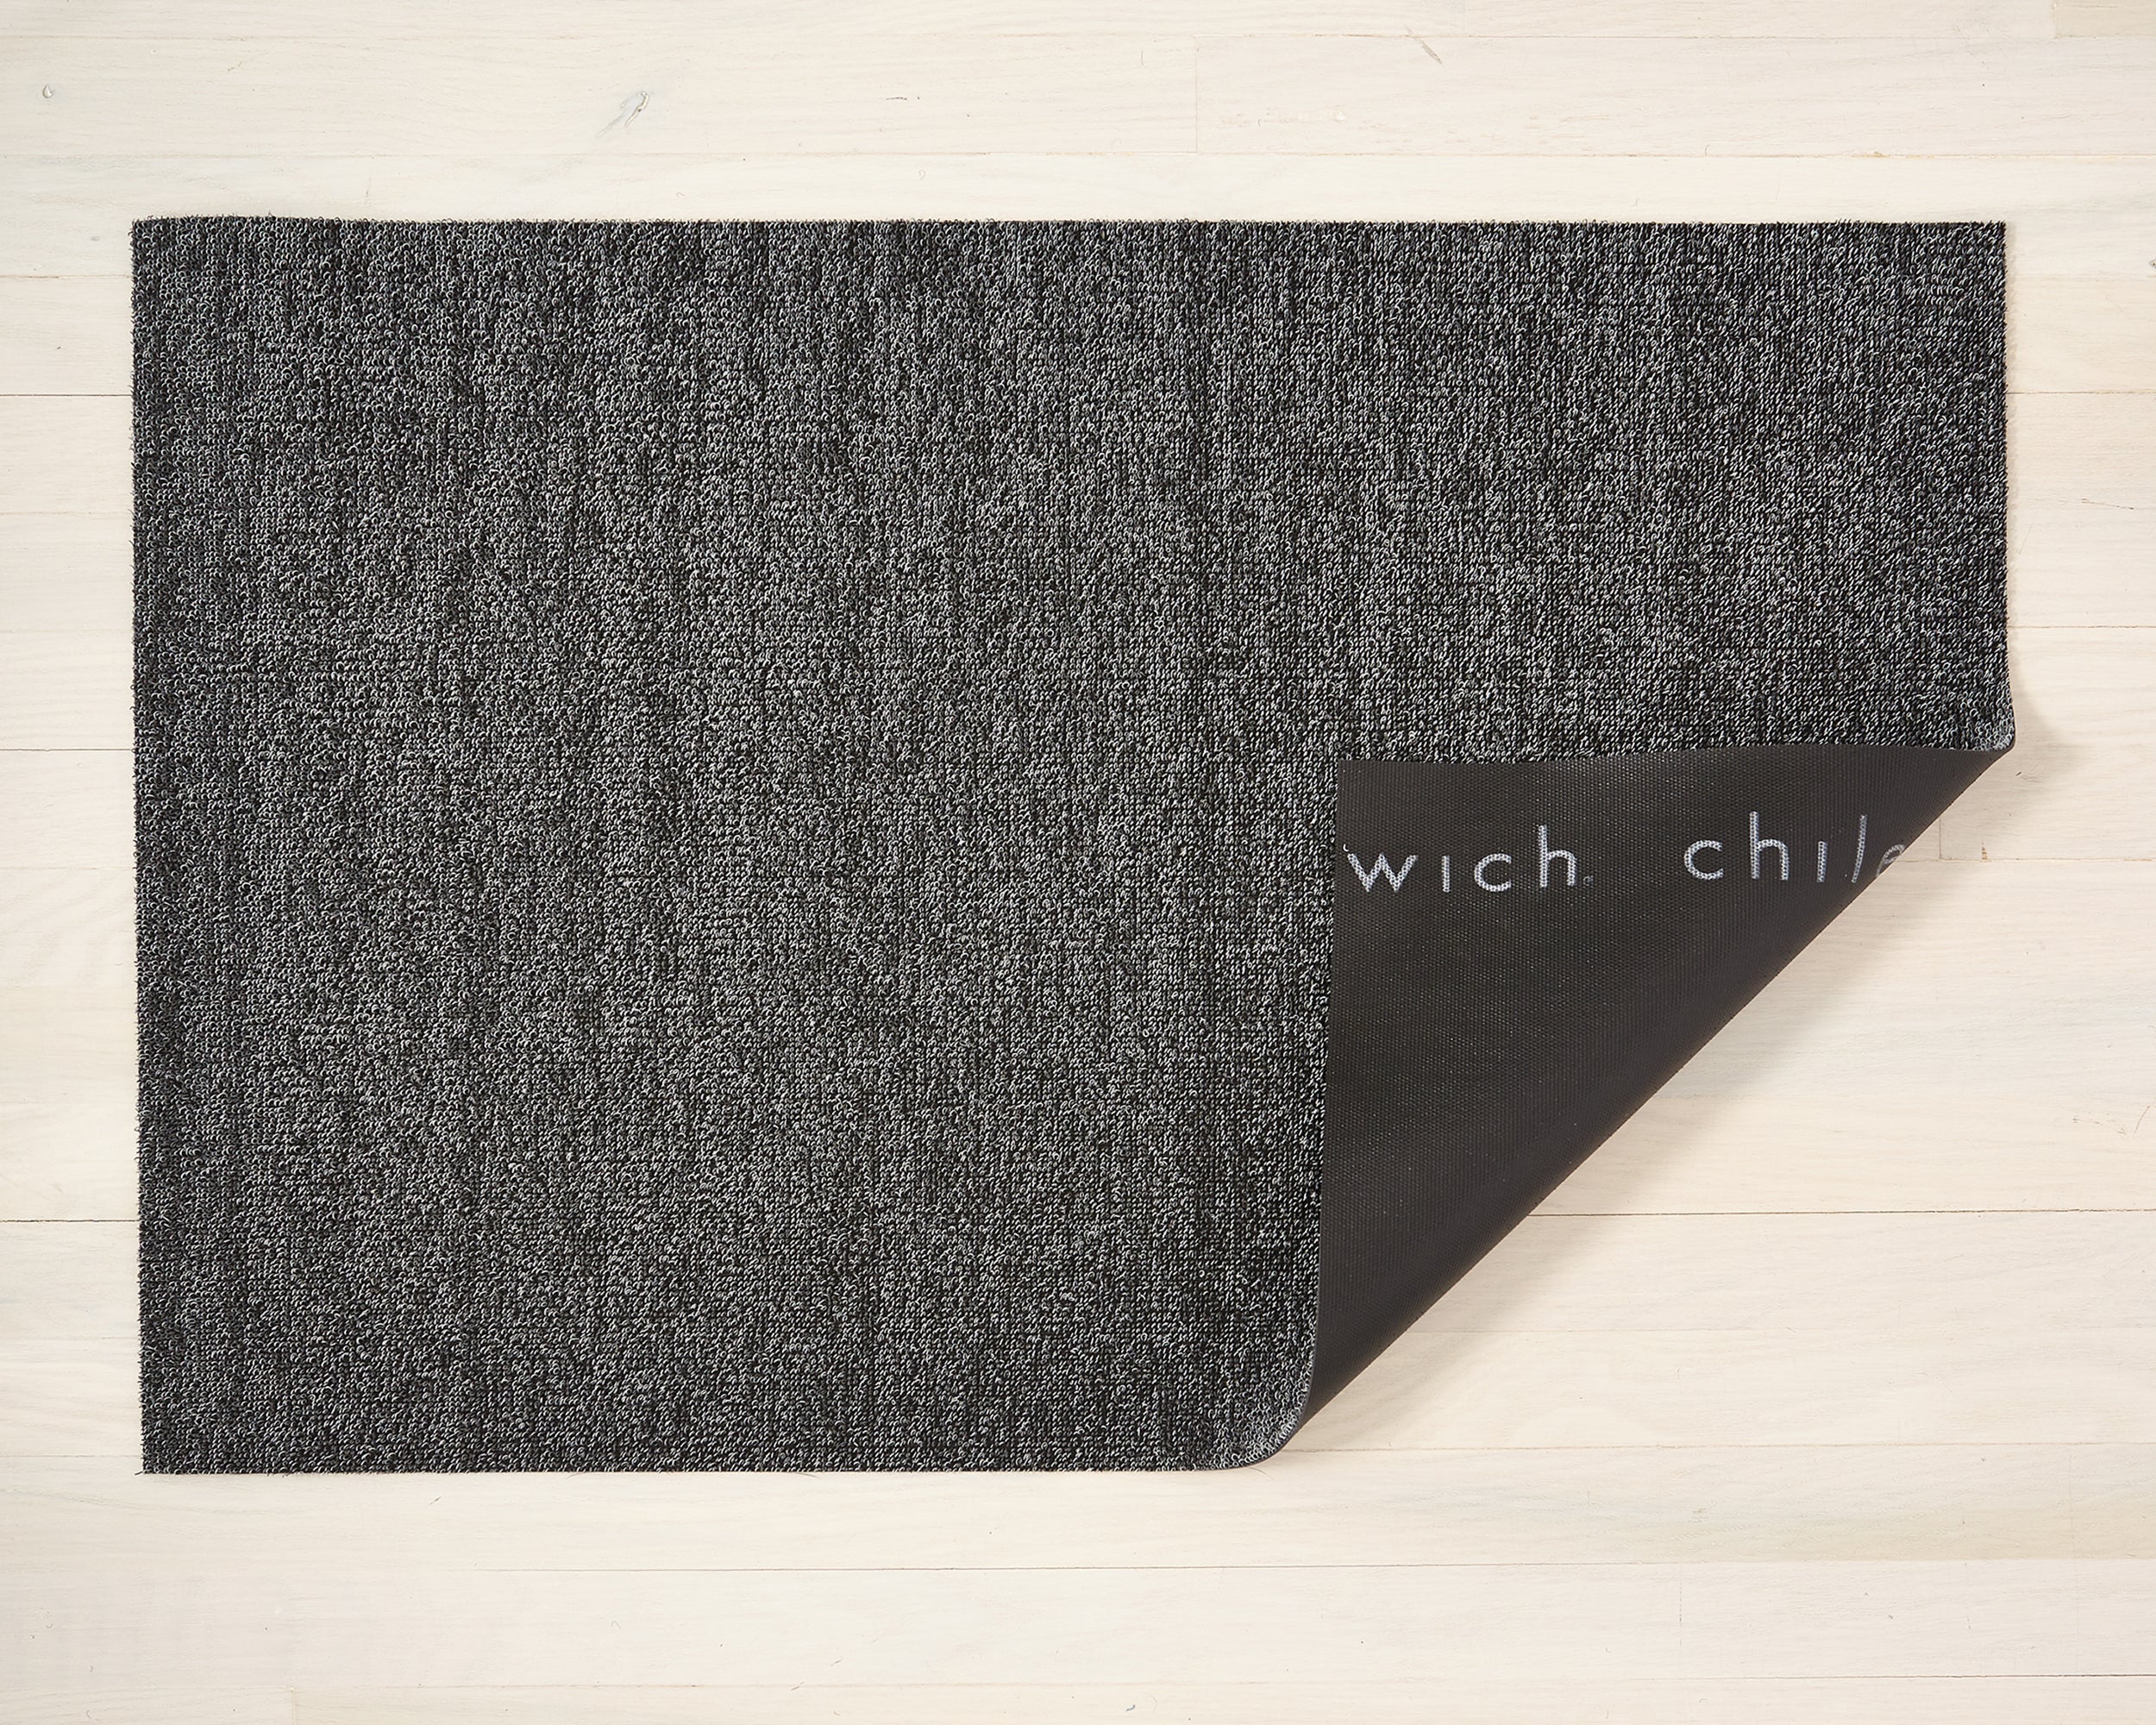 Chilewich Striped Shag Indoor & Outdoor Mat in 8 Colors & 4 Sizes